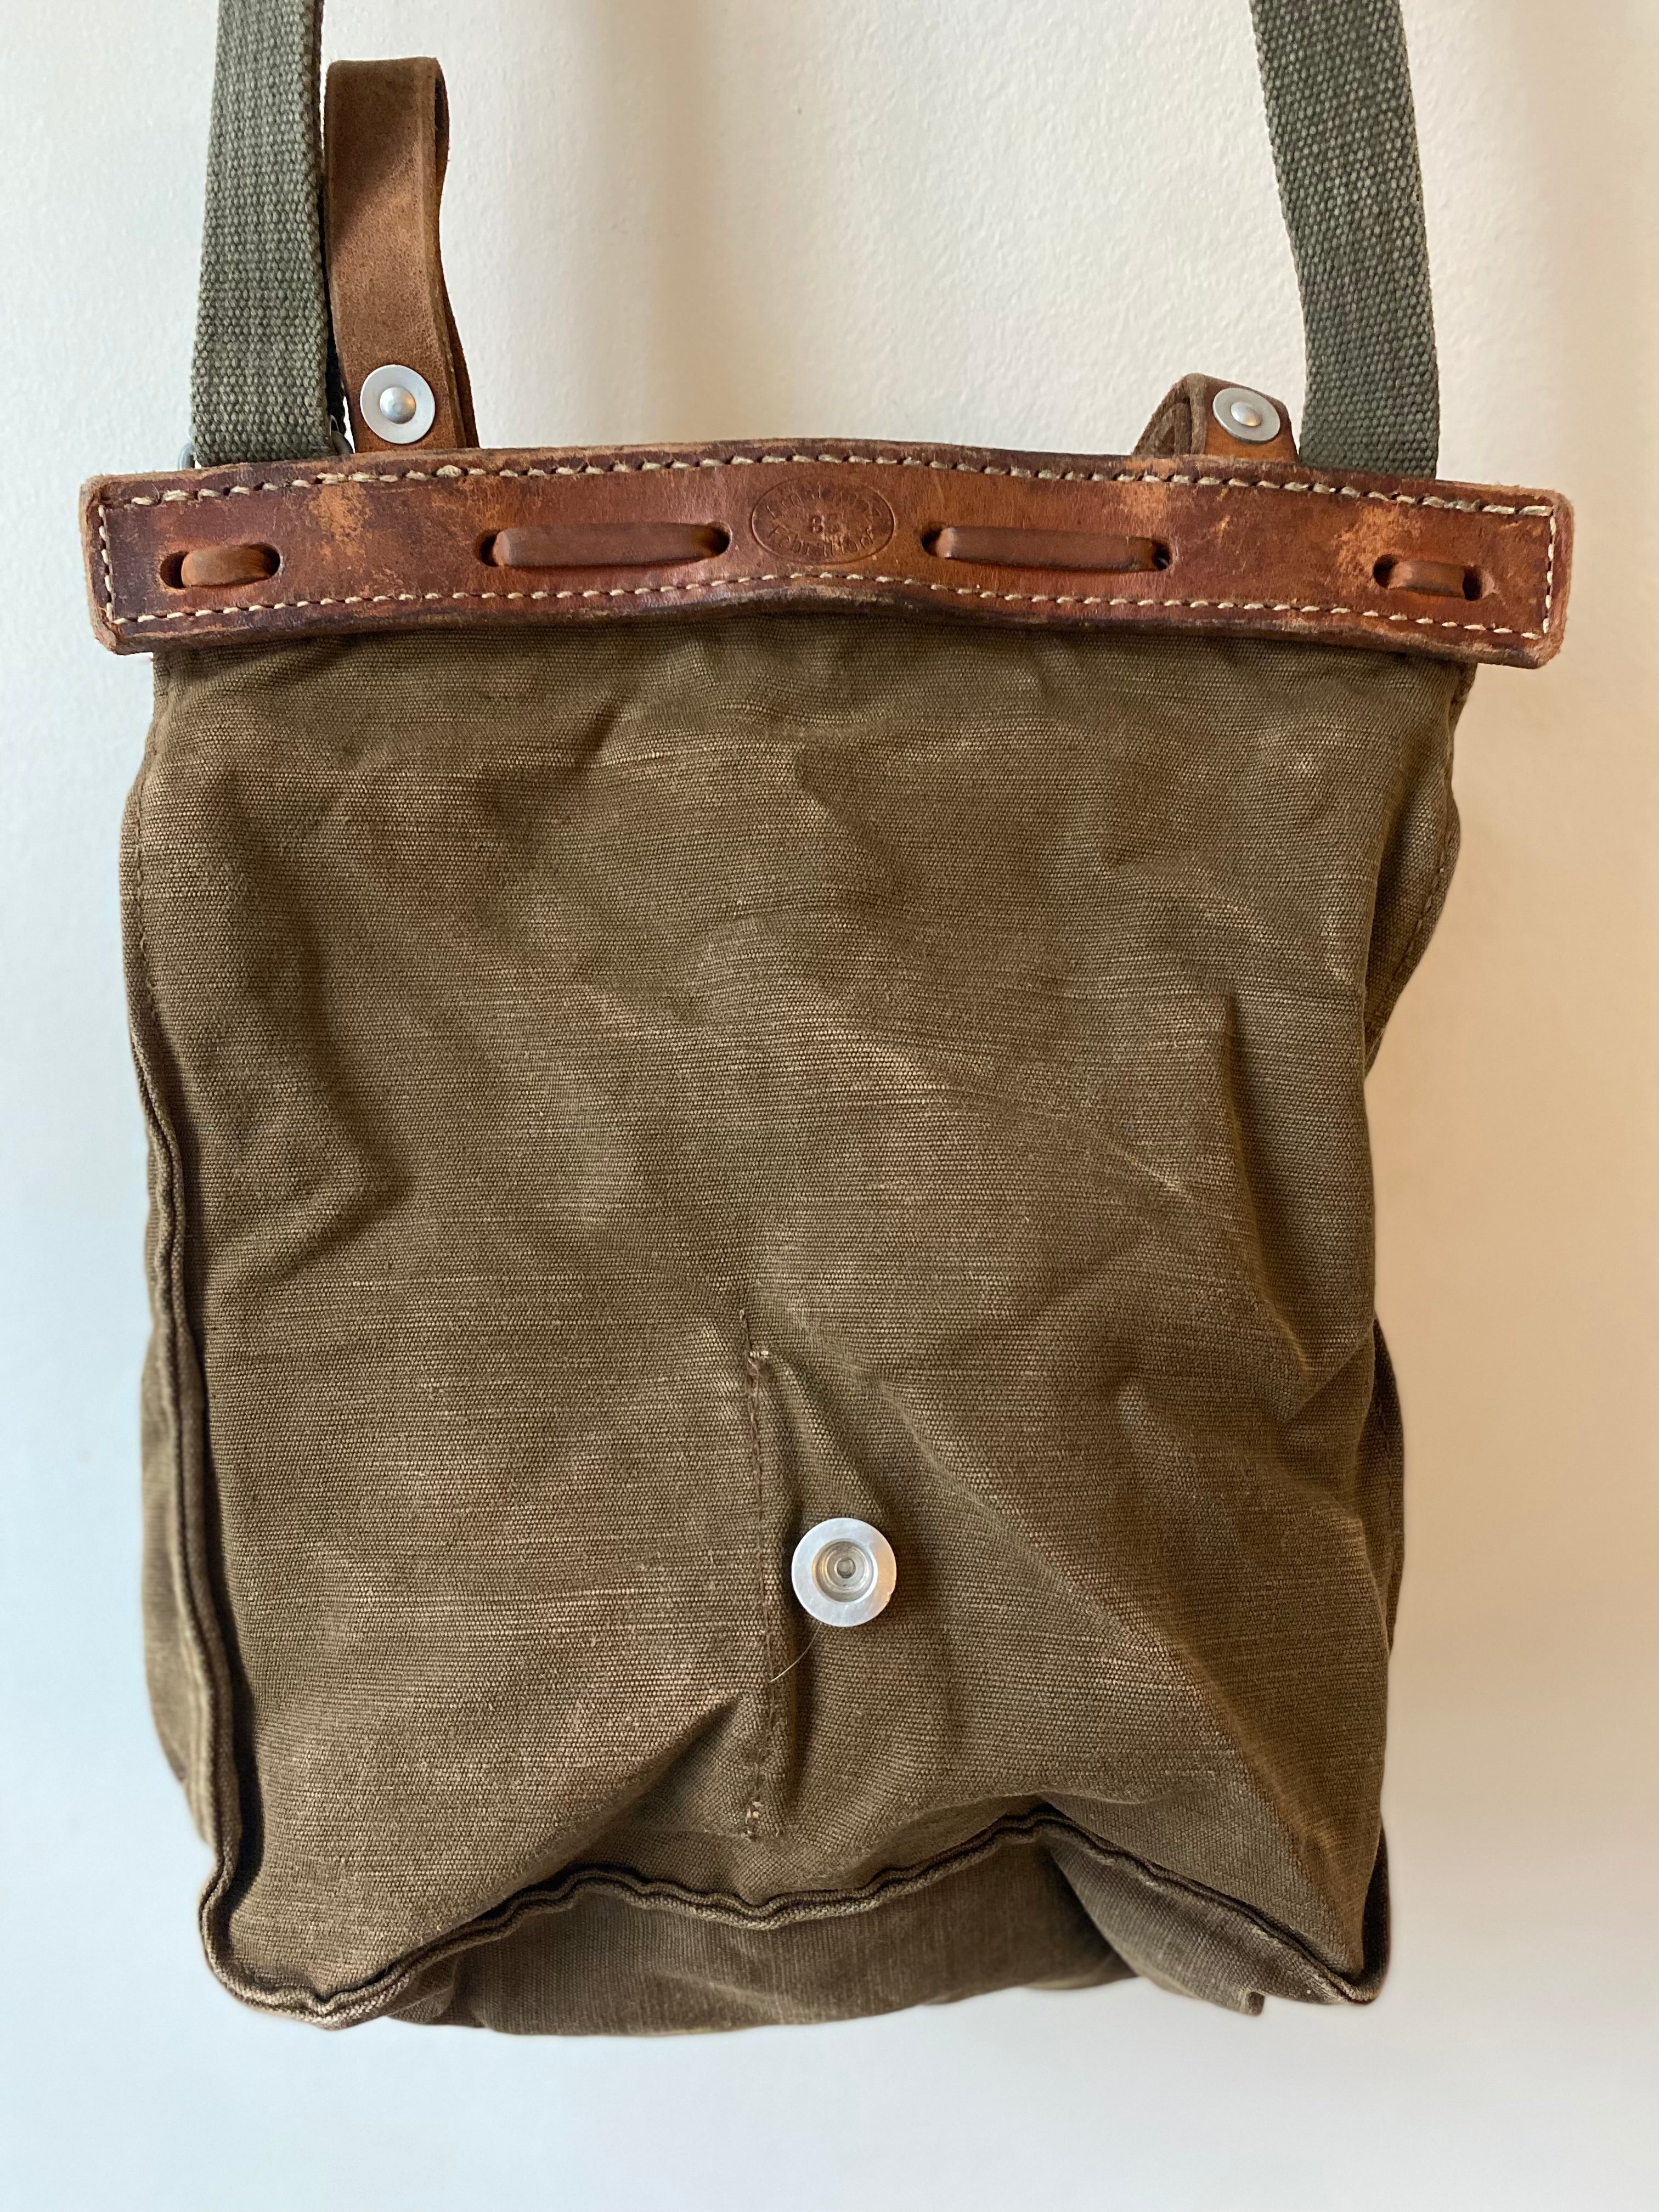 OLD SCHOOL/RETRO SHAKESPEARE CANVAS TROUT FISHING BAG – Vintage